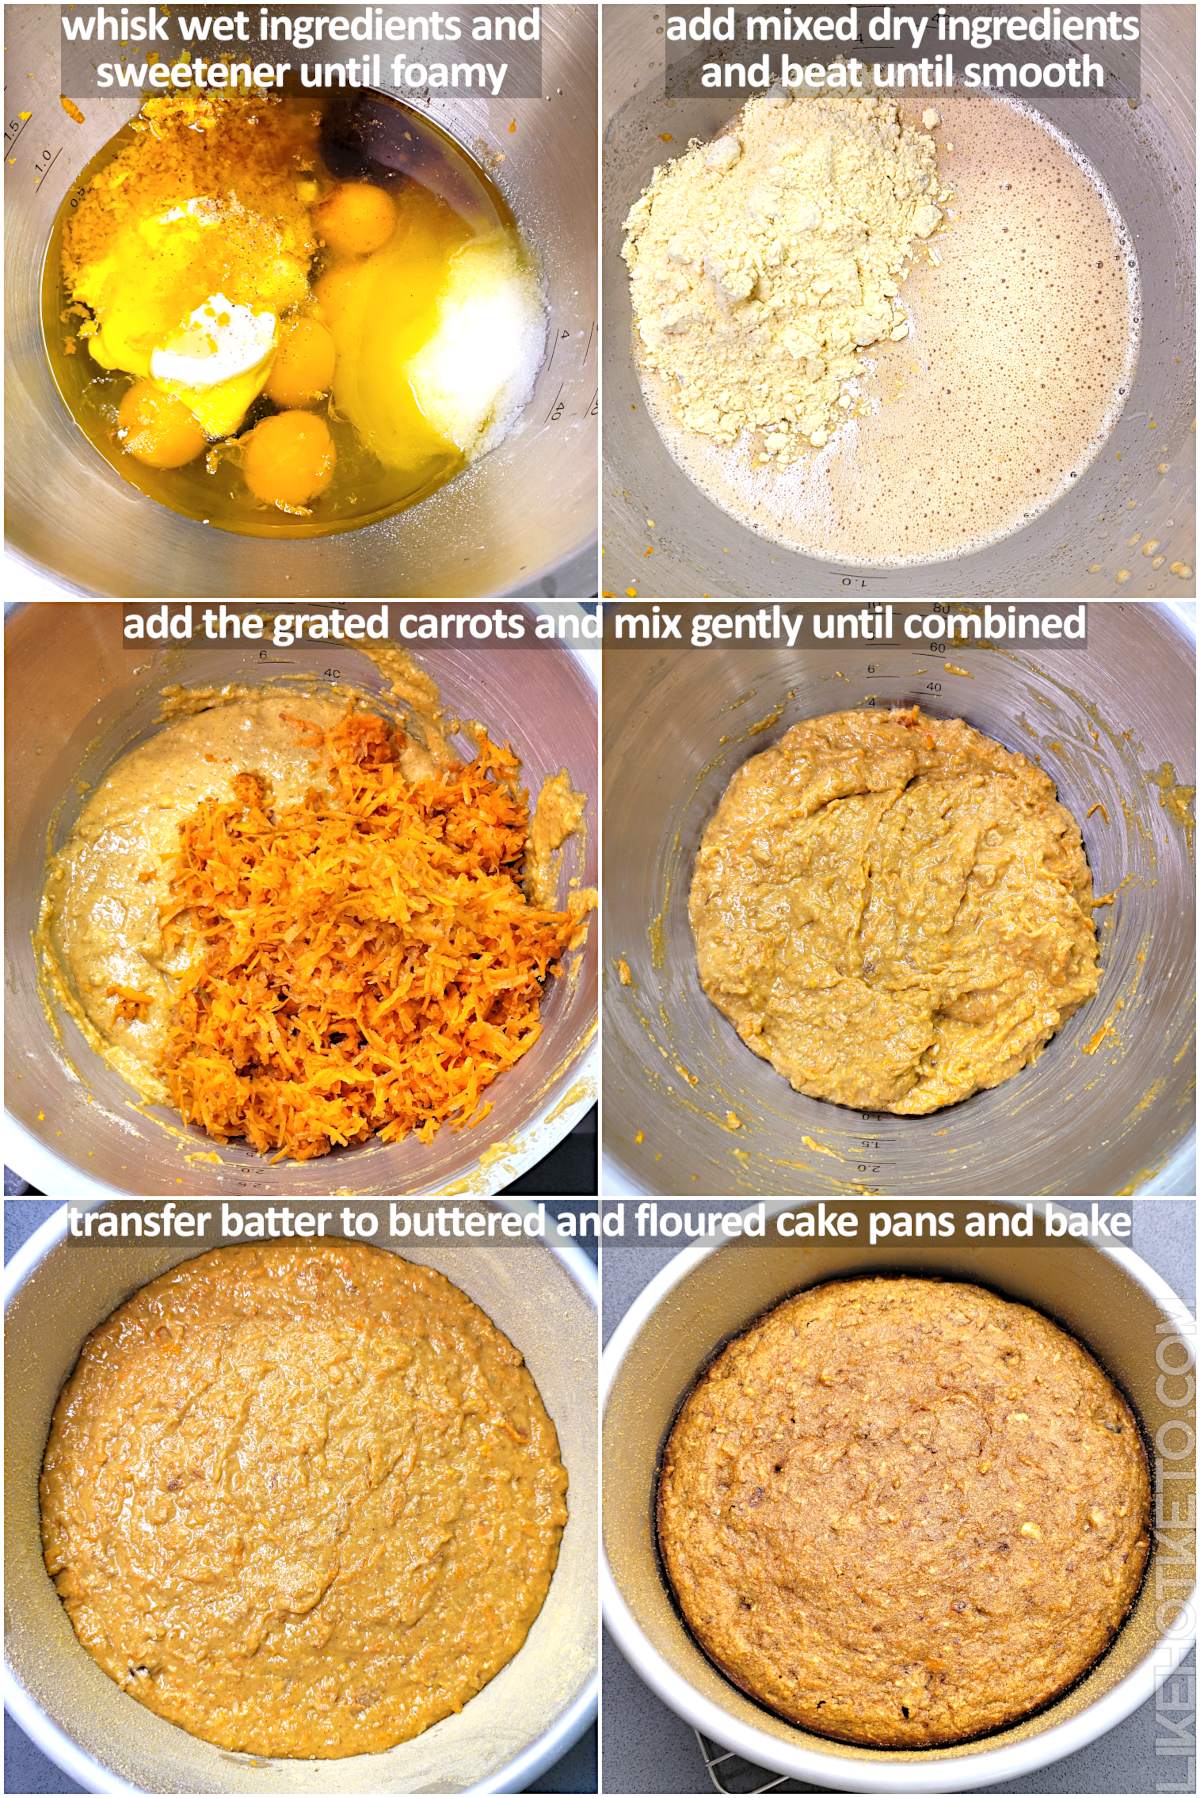 Step by step pictures of the keto carrot cake batter mixing and baking.